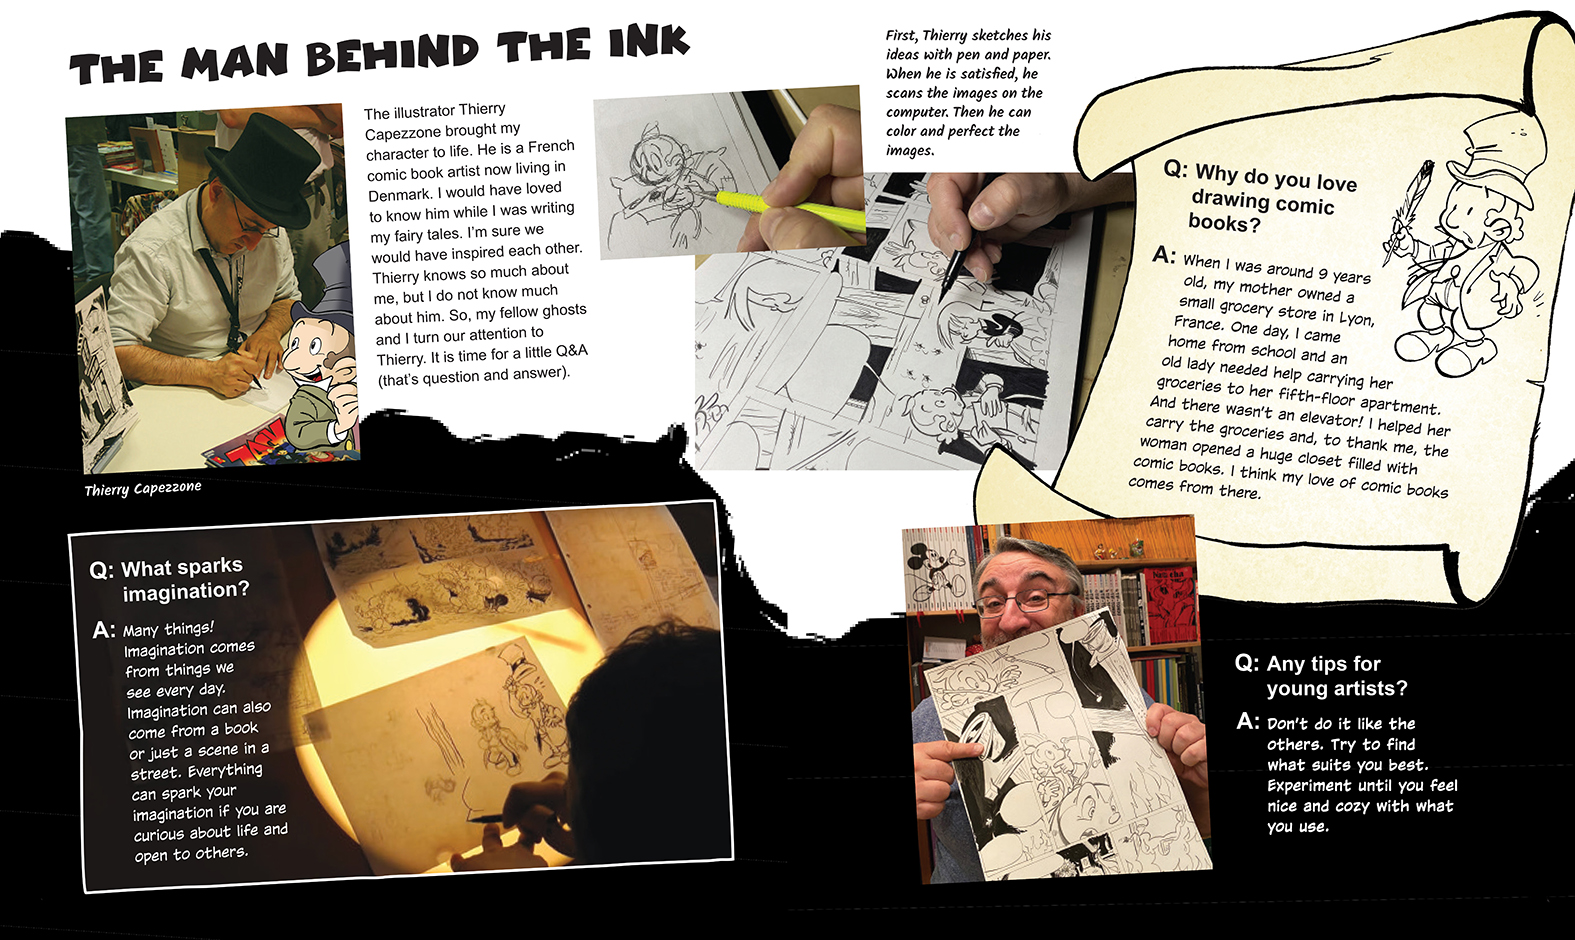 The Adventures of Young H.C. Andersen: The Man behind the Ink